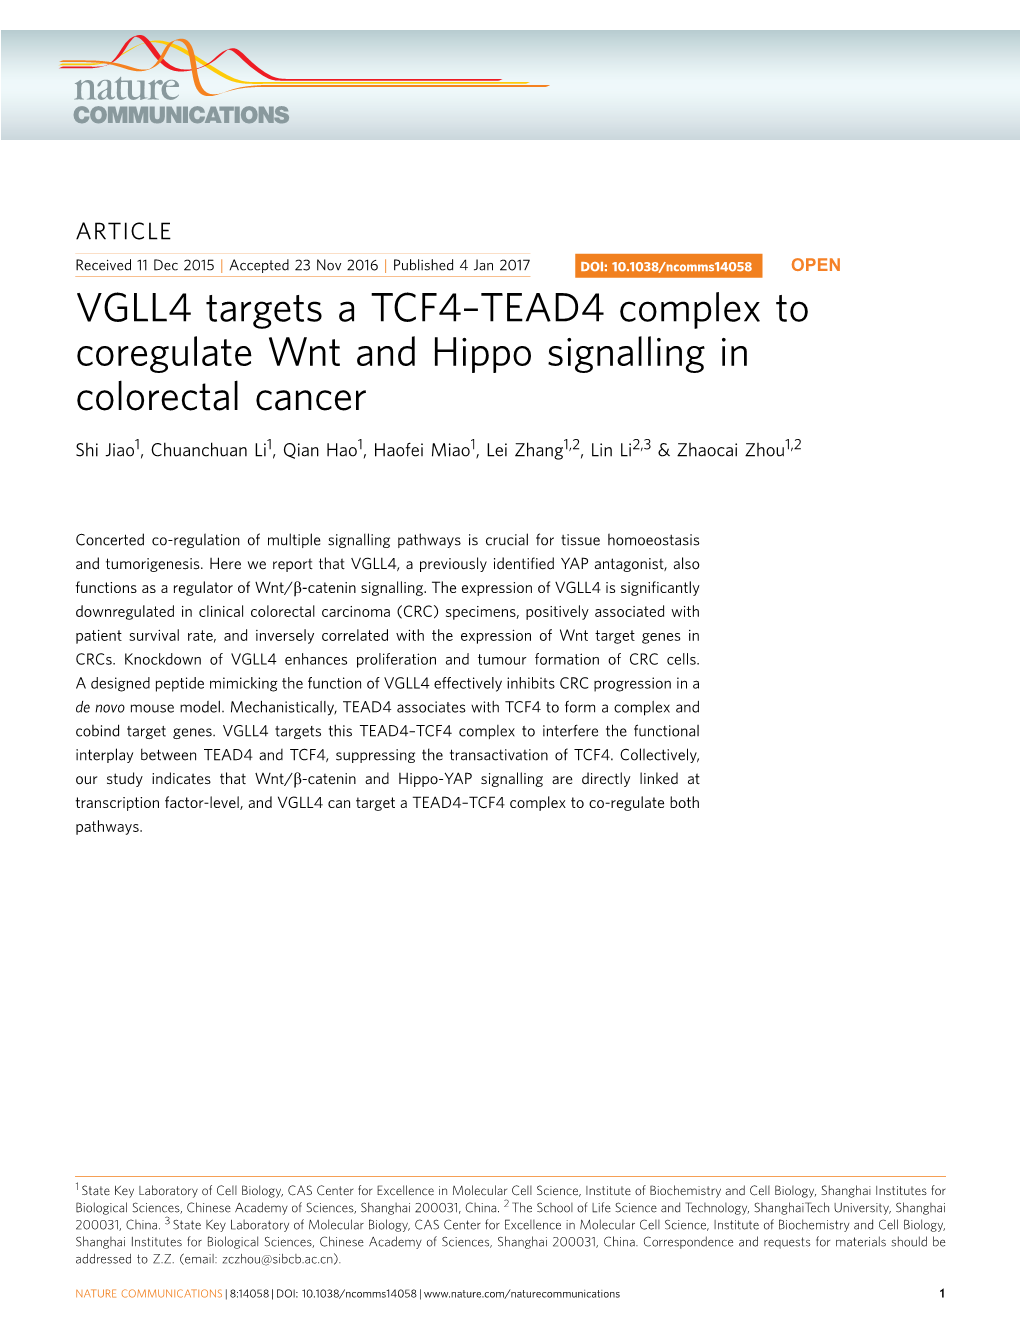 VGLL4 Targets a TCF4–TEAD4 Complex to Coregulate Wnt and Hippo Signalling in Colorectal Cancer